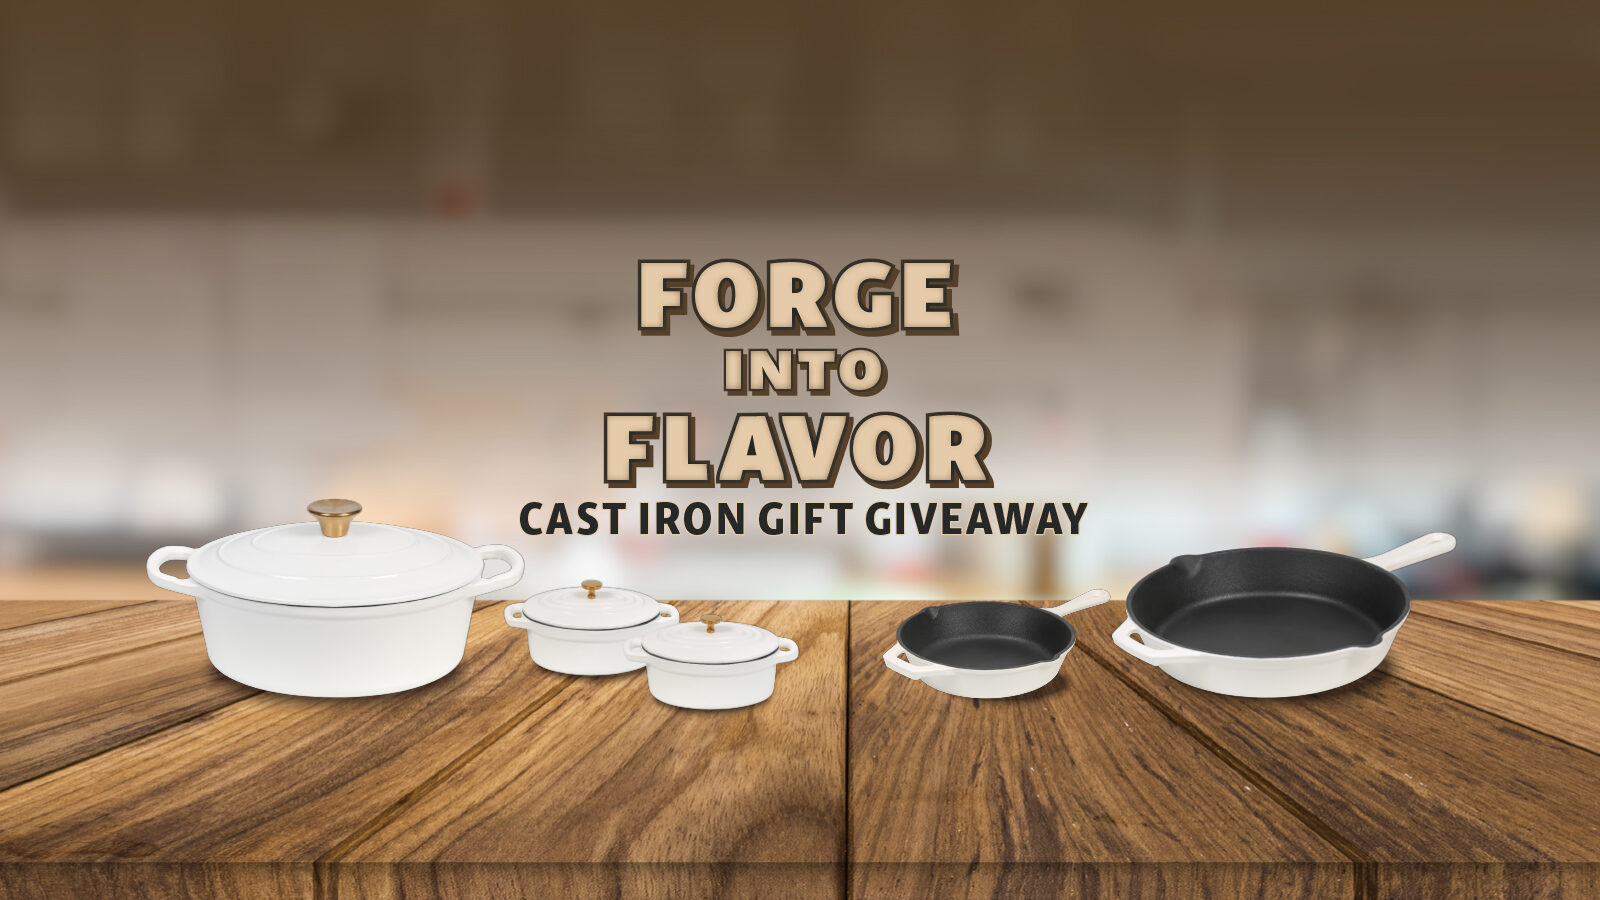 Forge into Flavor Cast Iron Gift Giveaway